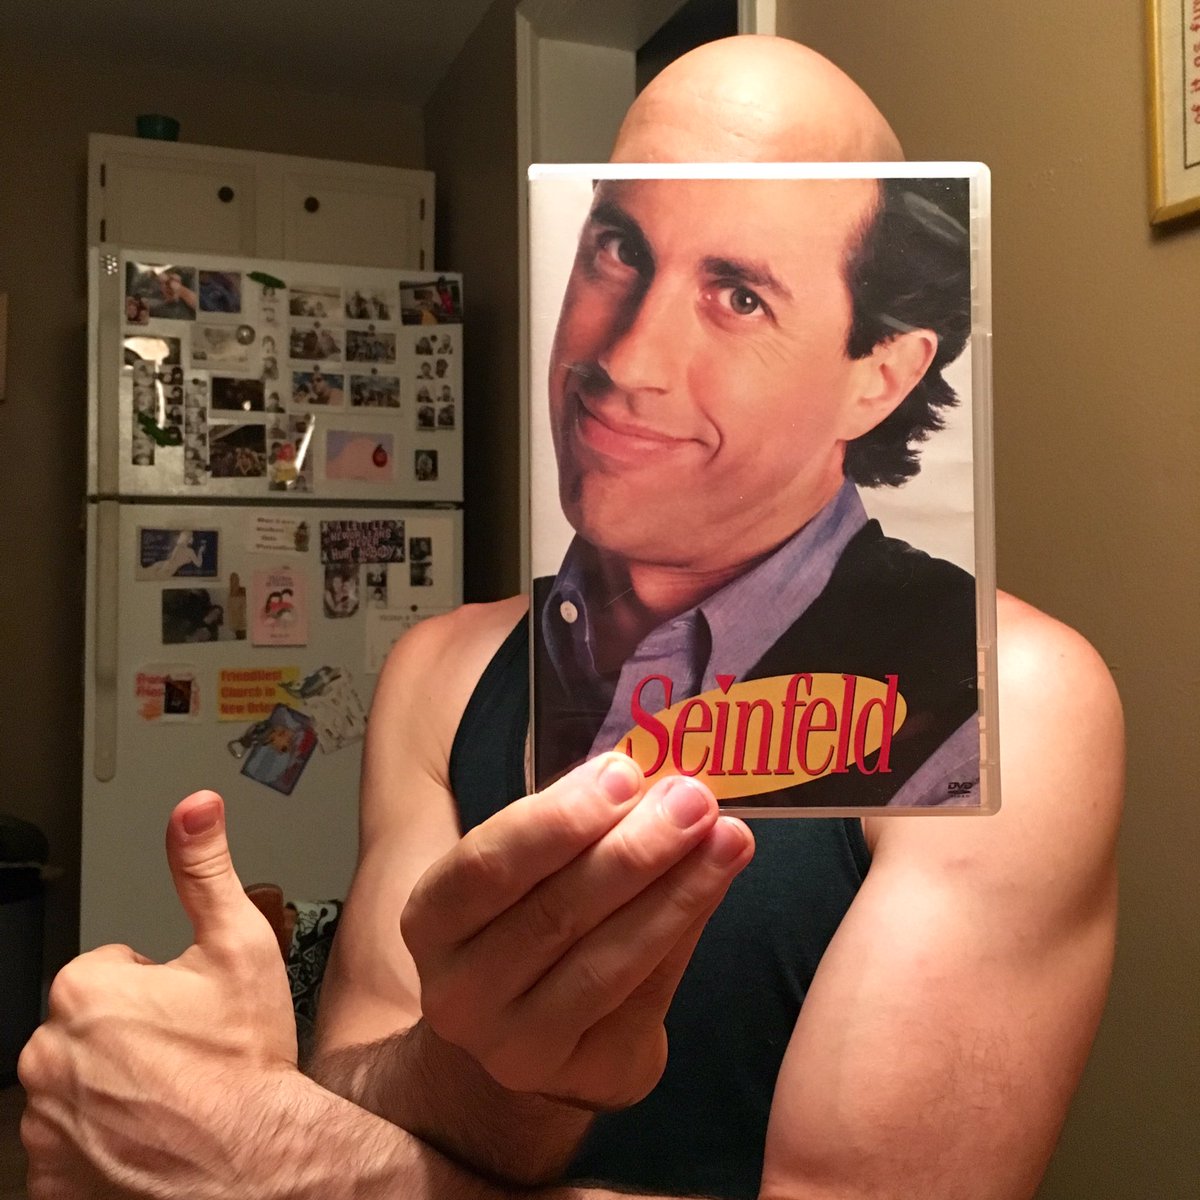 Ben O'Brien poses with the Seinfeld DVD sleeve as though he is Seinfeld (Ben O'Brien/Kelly Lasserre/Twitter)